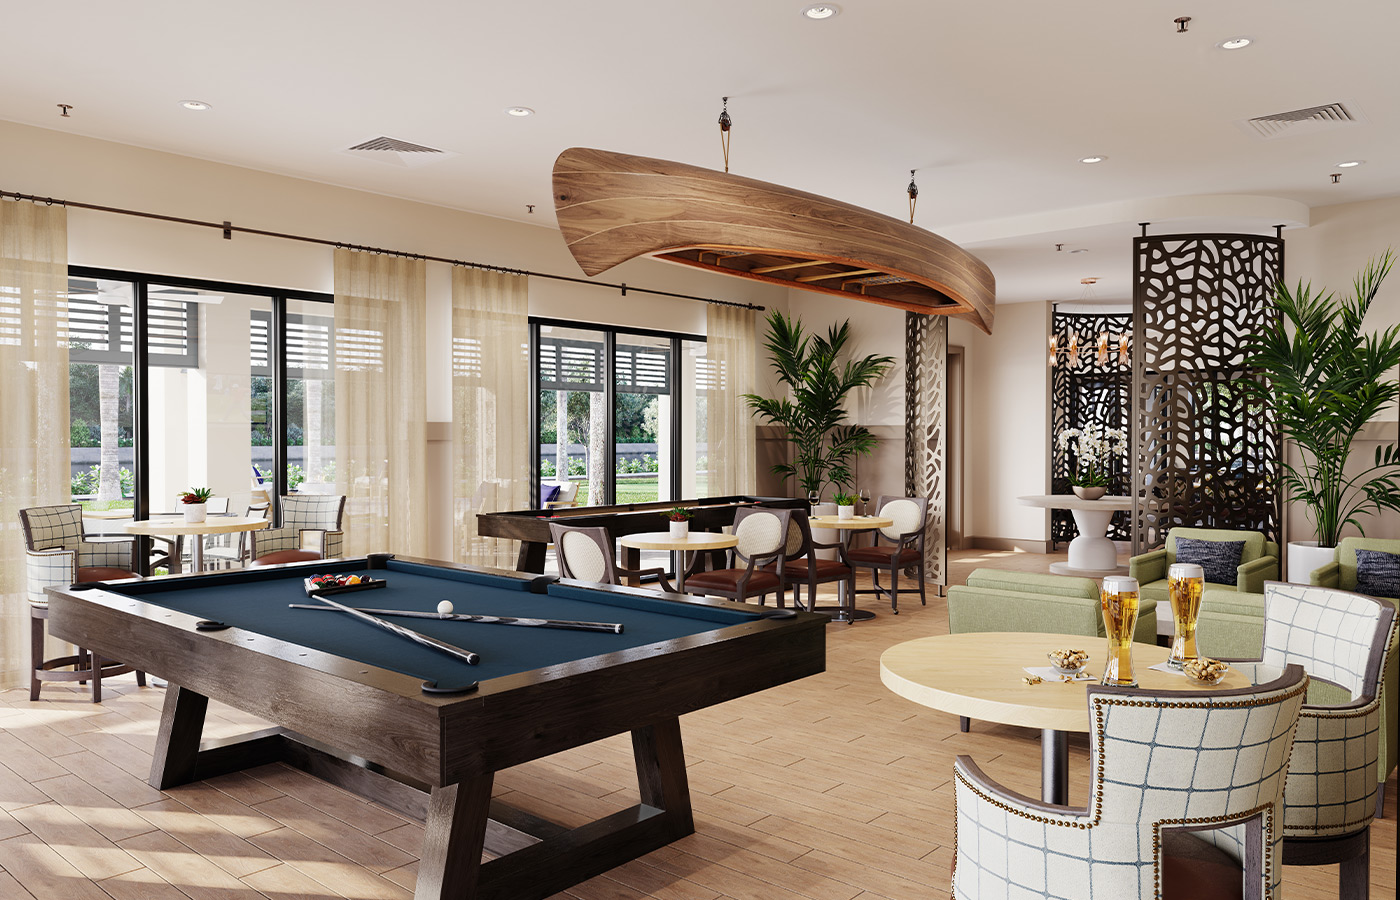 A activity room with a billiards table.